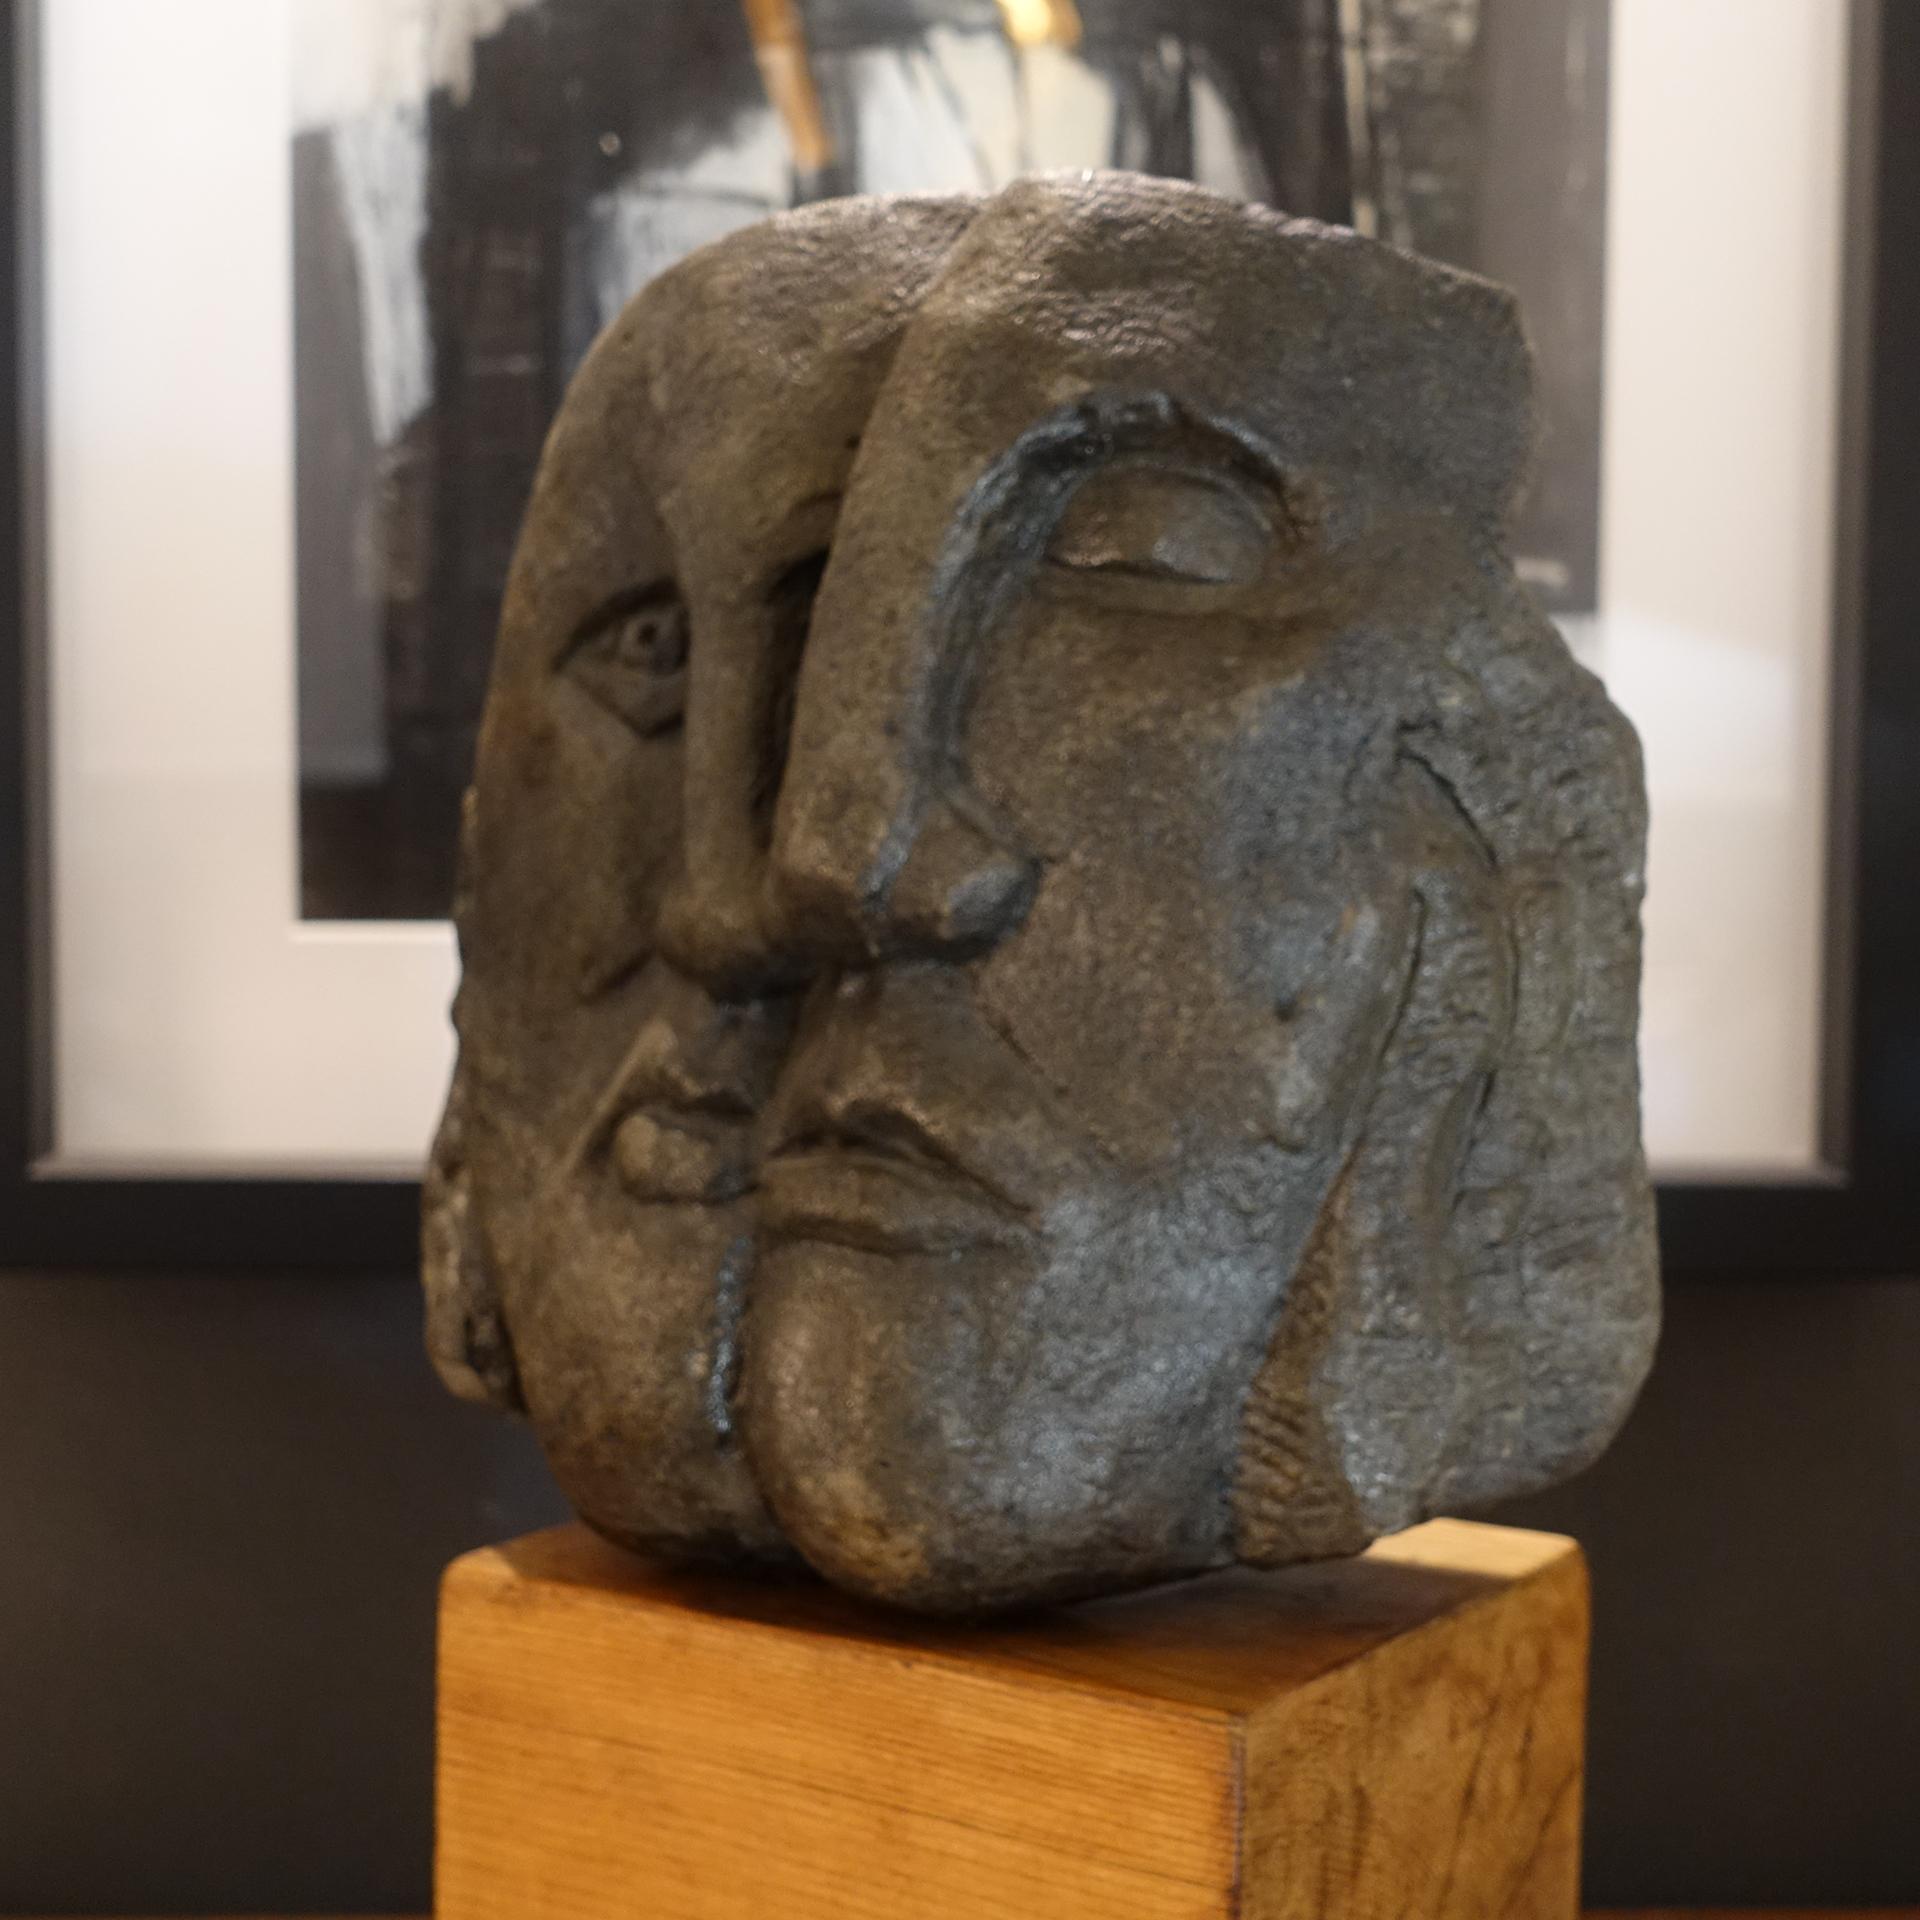 Modern Figurative Concrete Sculpture Picasso Style, Wood Base, Italy, circa 1980s